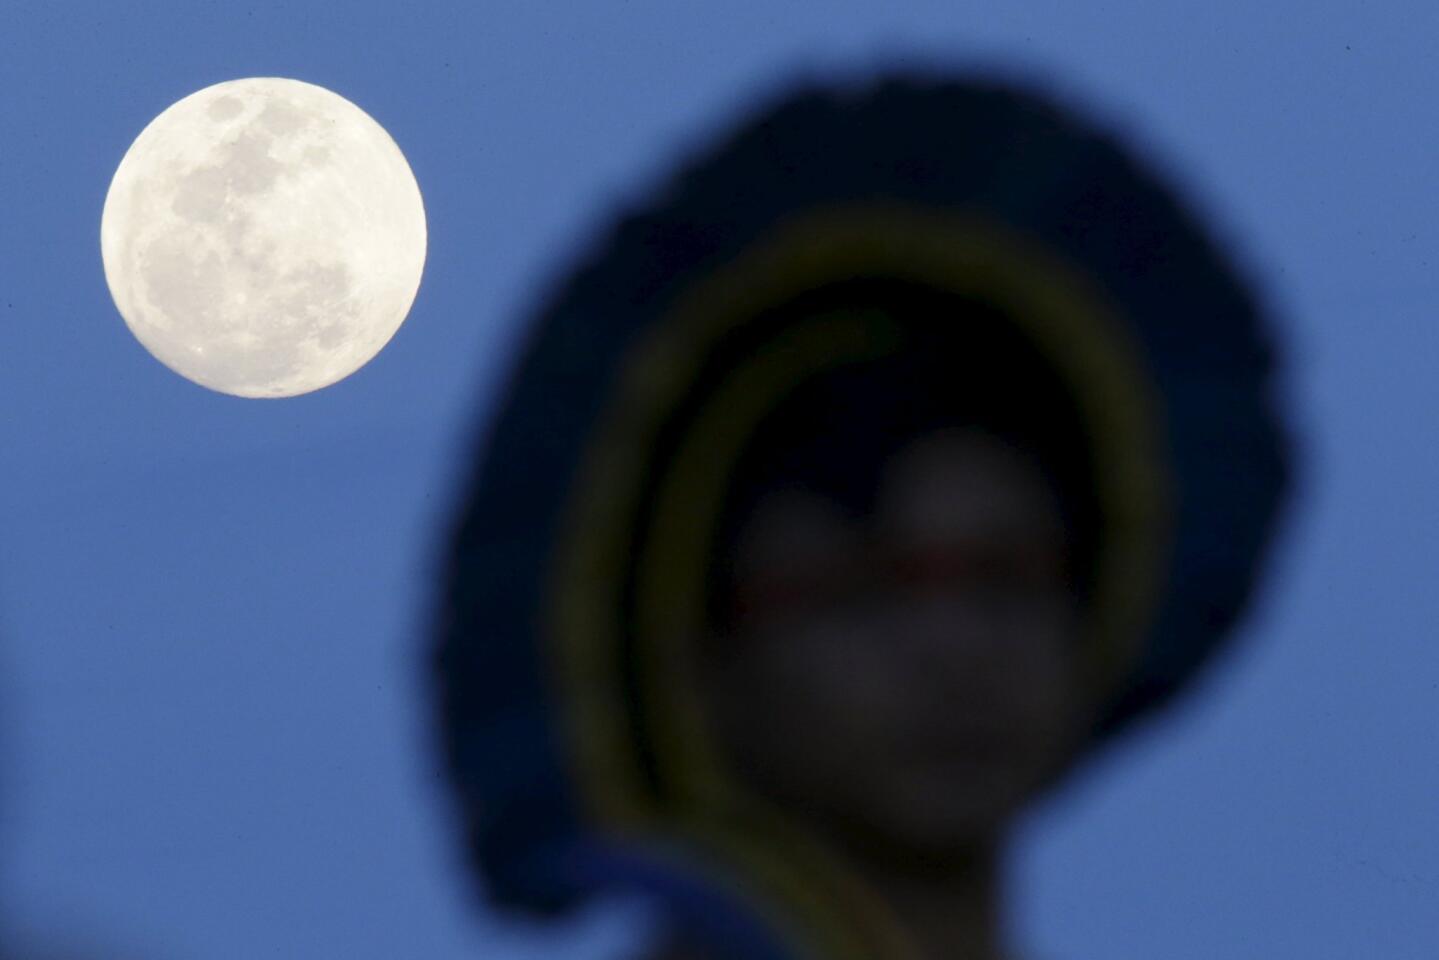 A full moon is seen during the first World Games for Indigenous Peoples in Palmas